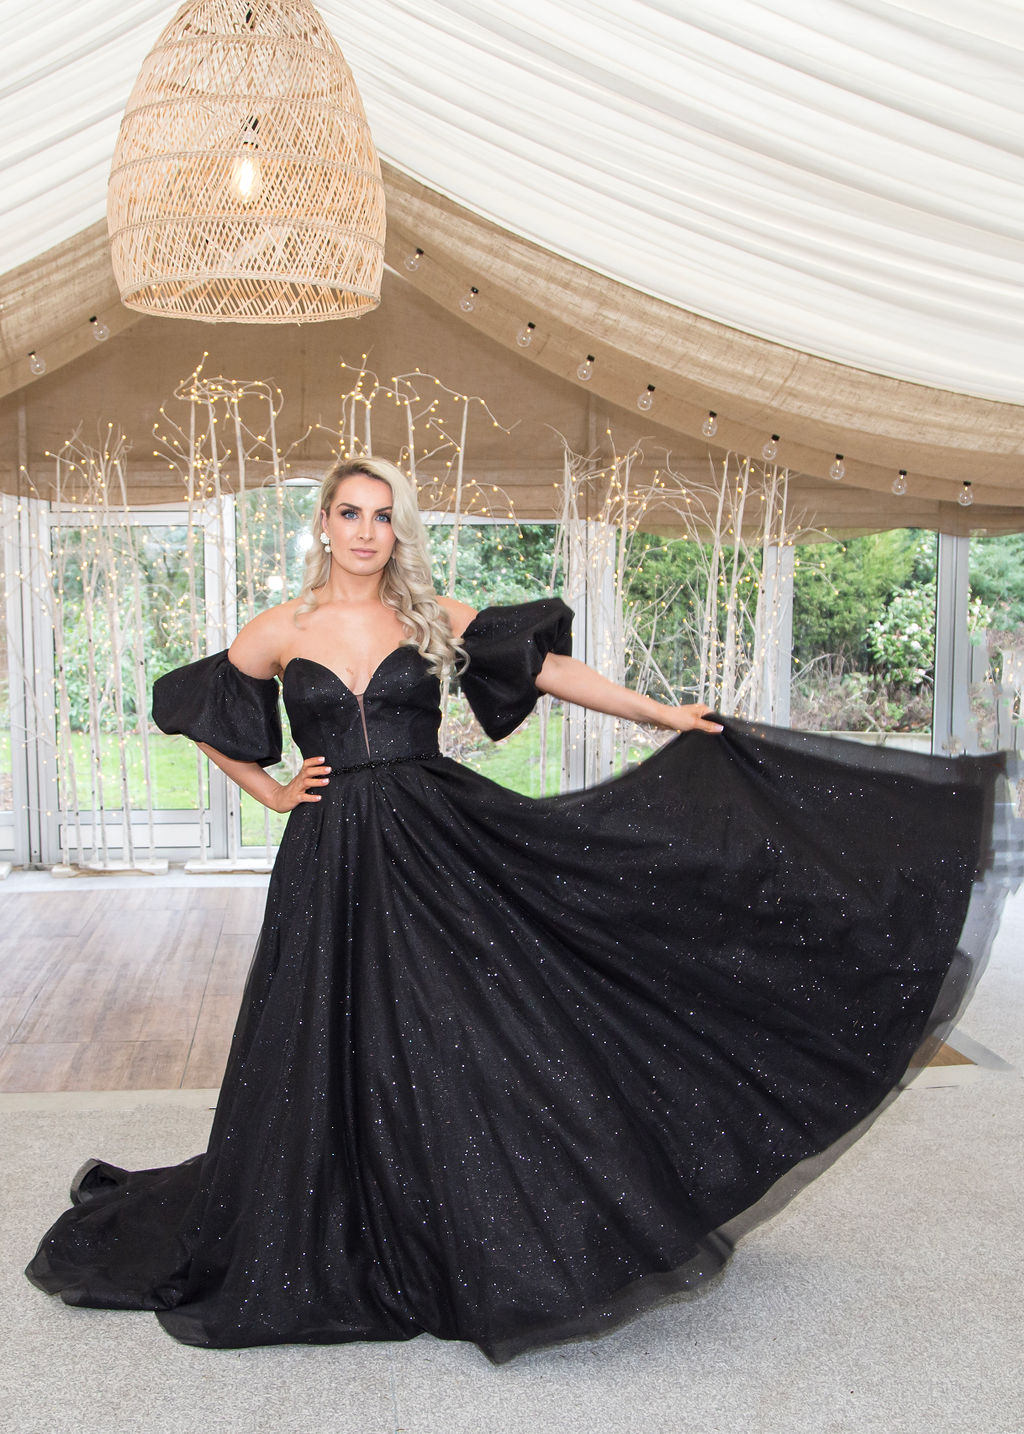 Dancing in the Moonlight sparkling black ballgown wedding dress designed by the Limelight team styled with detachable sleeves.